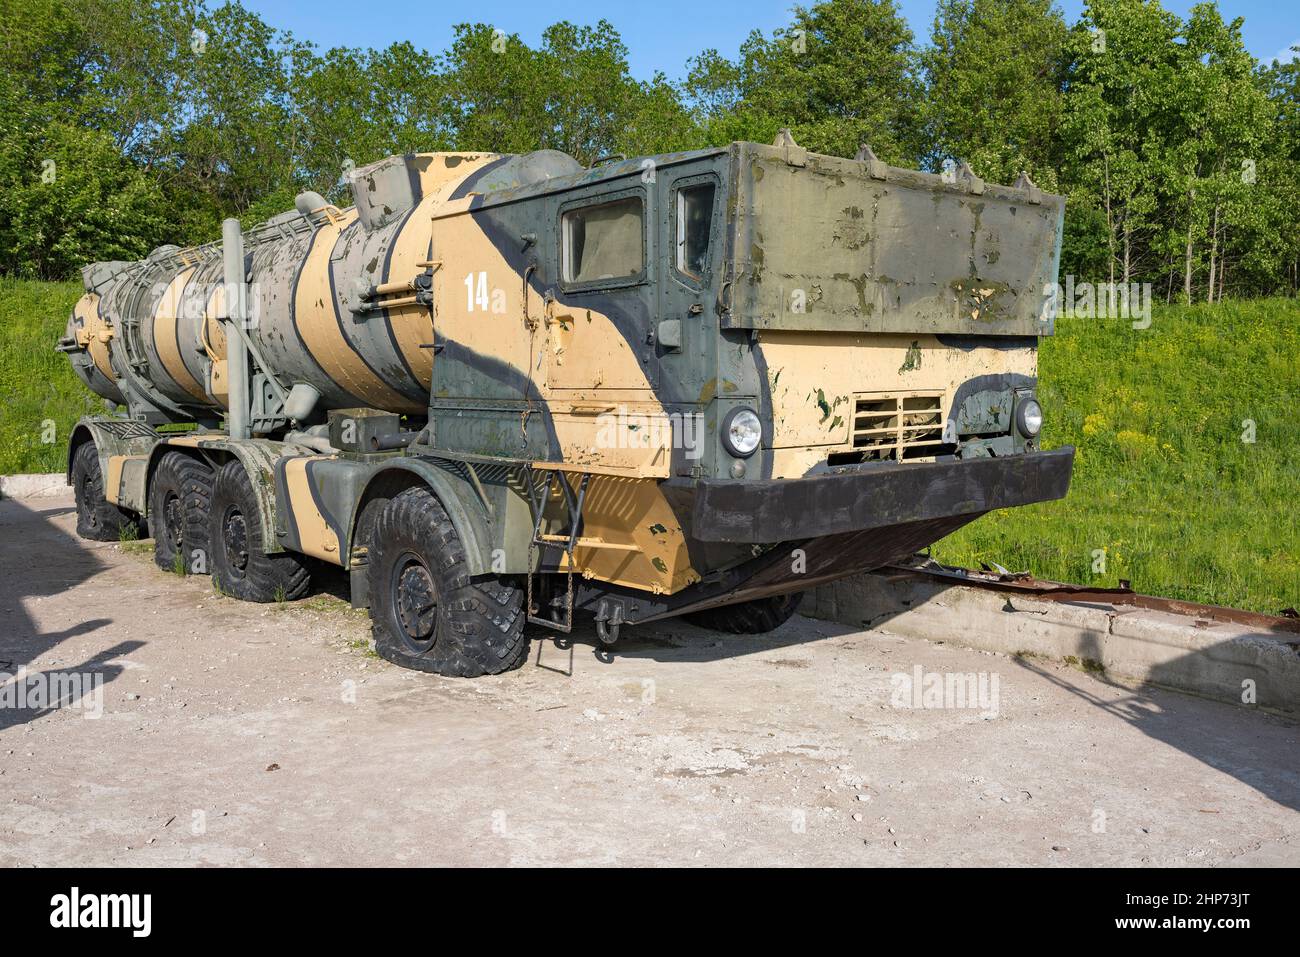 KRONSTADT, RUSSIA - JUNE 03, 2019: Self-propelled launcher SPU-35B of the old Soviet coastal missile system 'Redut' on a sunny summer day Stock Photo